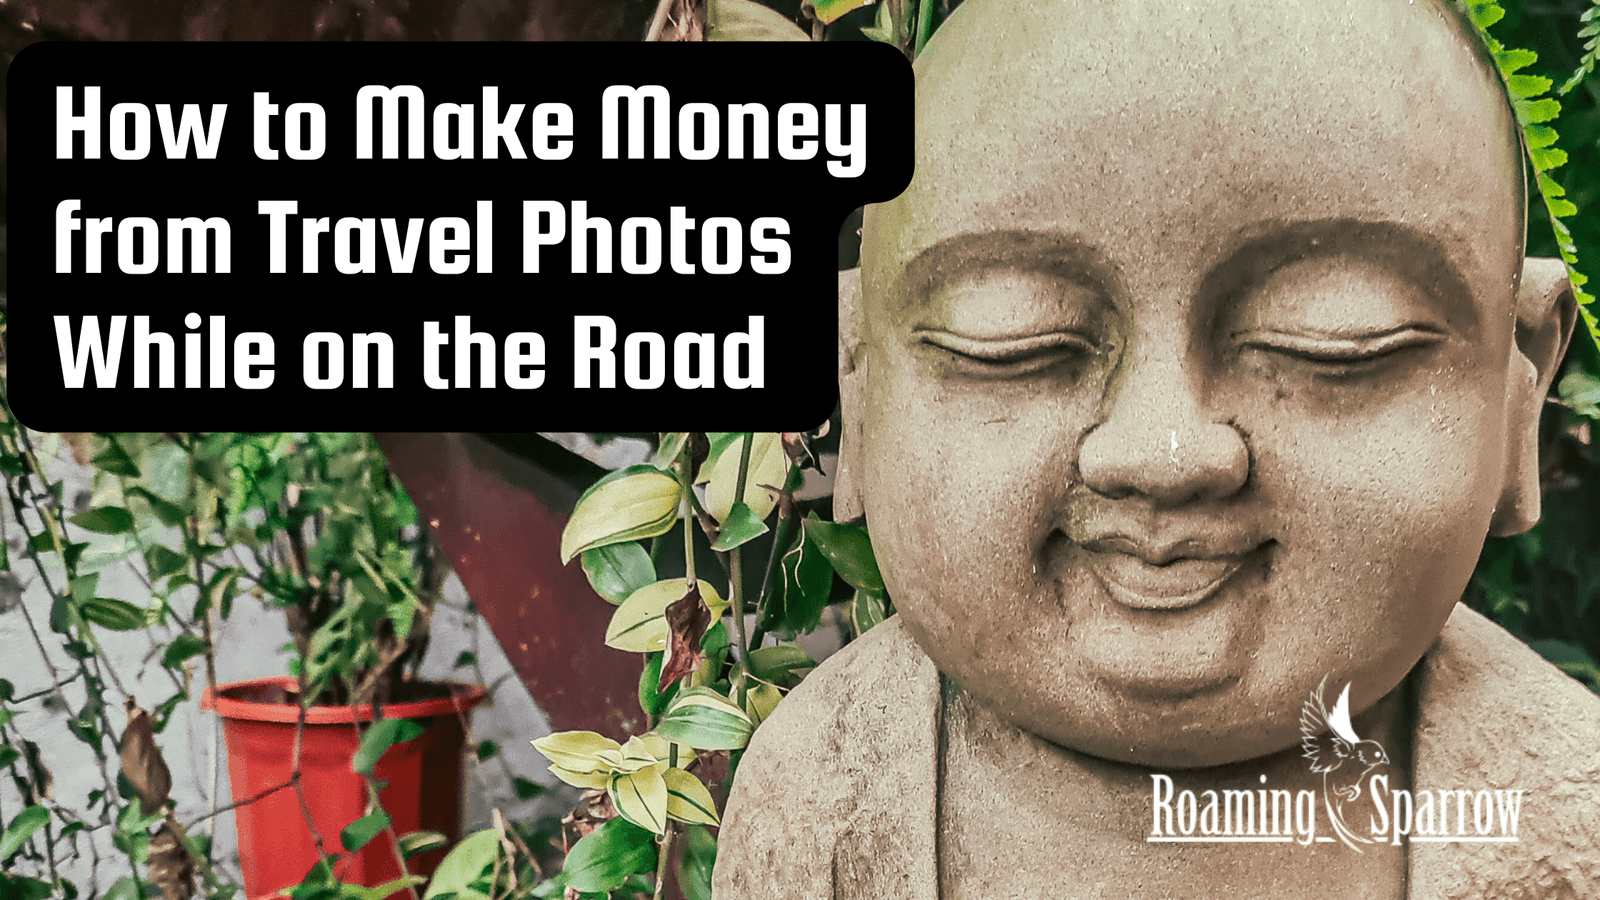 How to Make Money from Travel Photos While on the Road